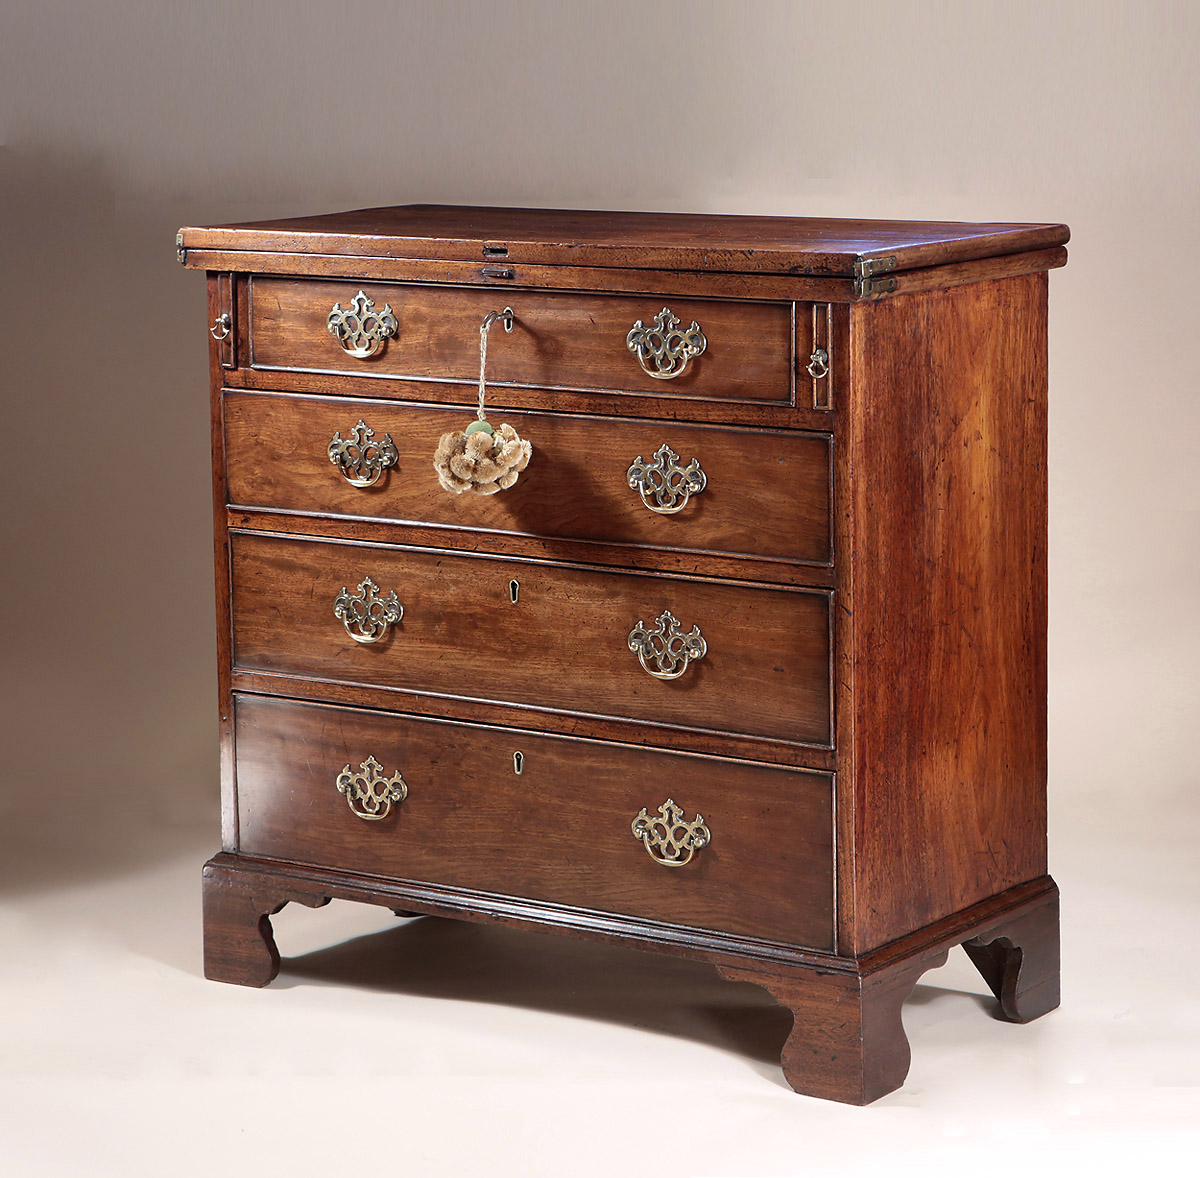 George II Cuban Mahogany Bachelor's Chest, with original surfaces and pierced brasses, England, c1745